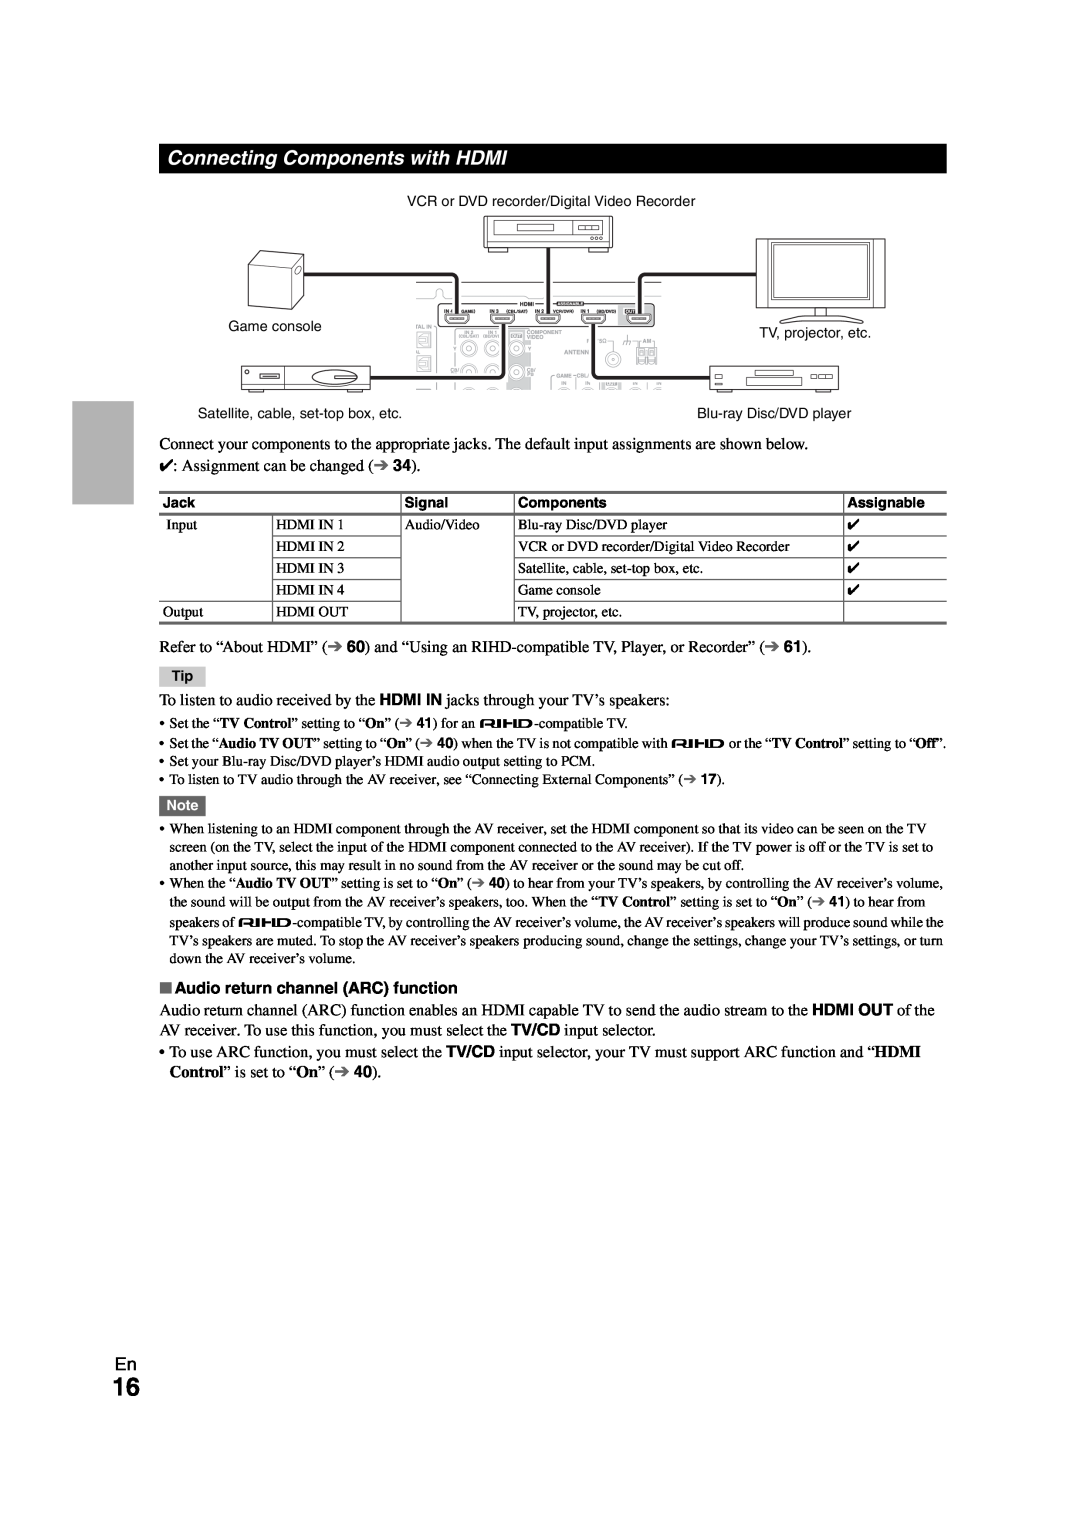 Onkyo HT-S5300 instruction manual Connecting Components with HDMI, Audio return channel ARC function 